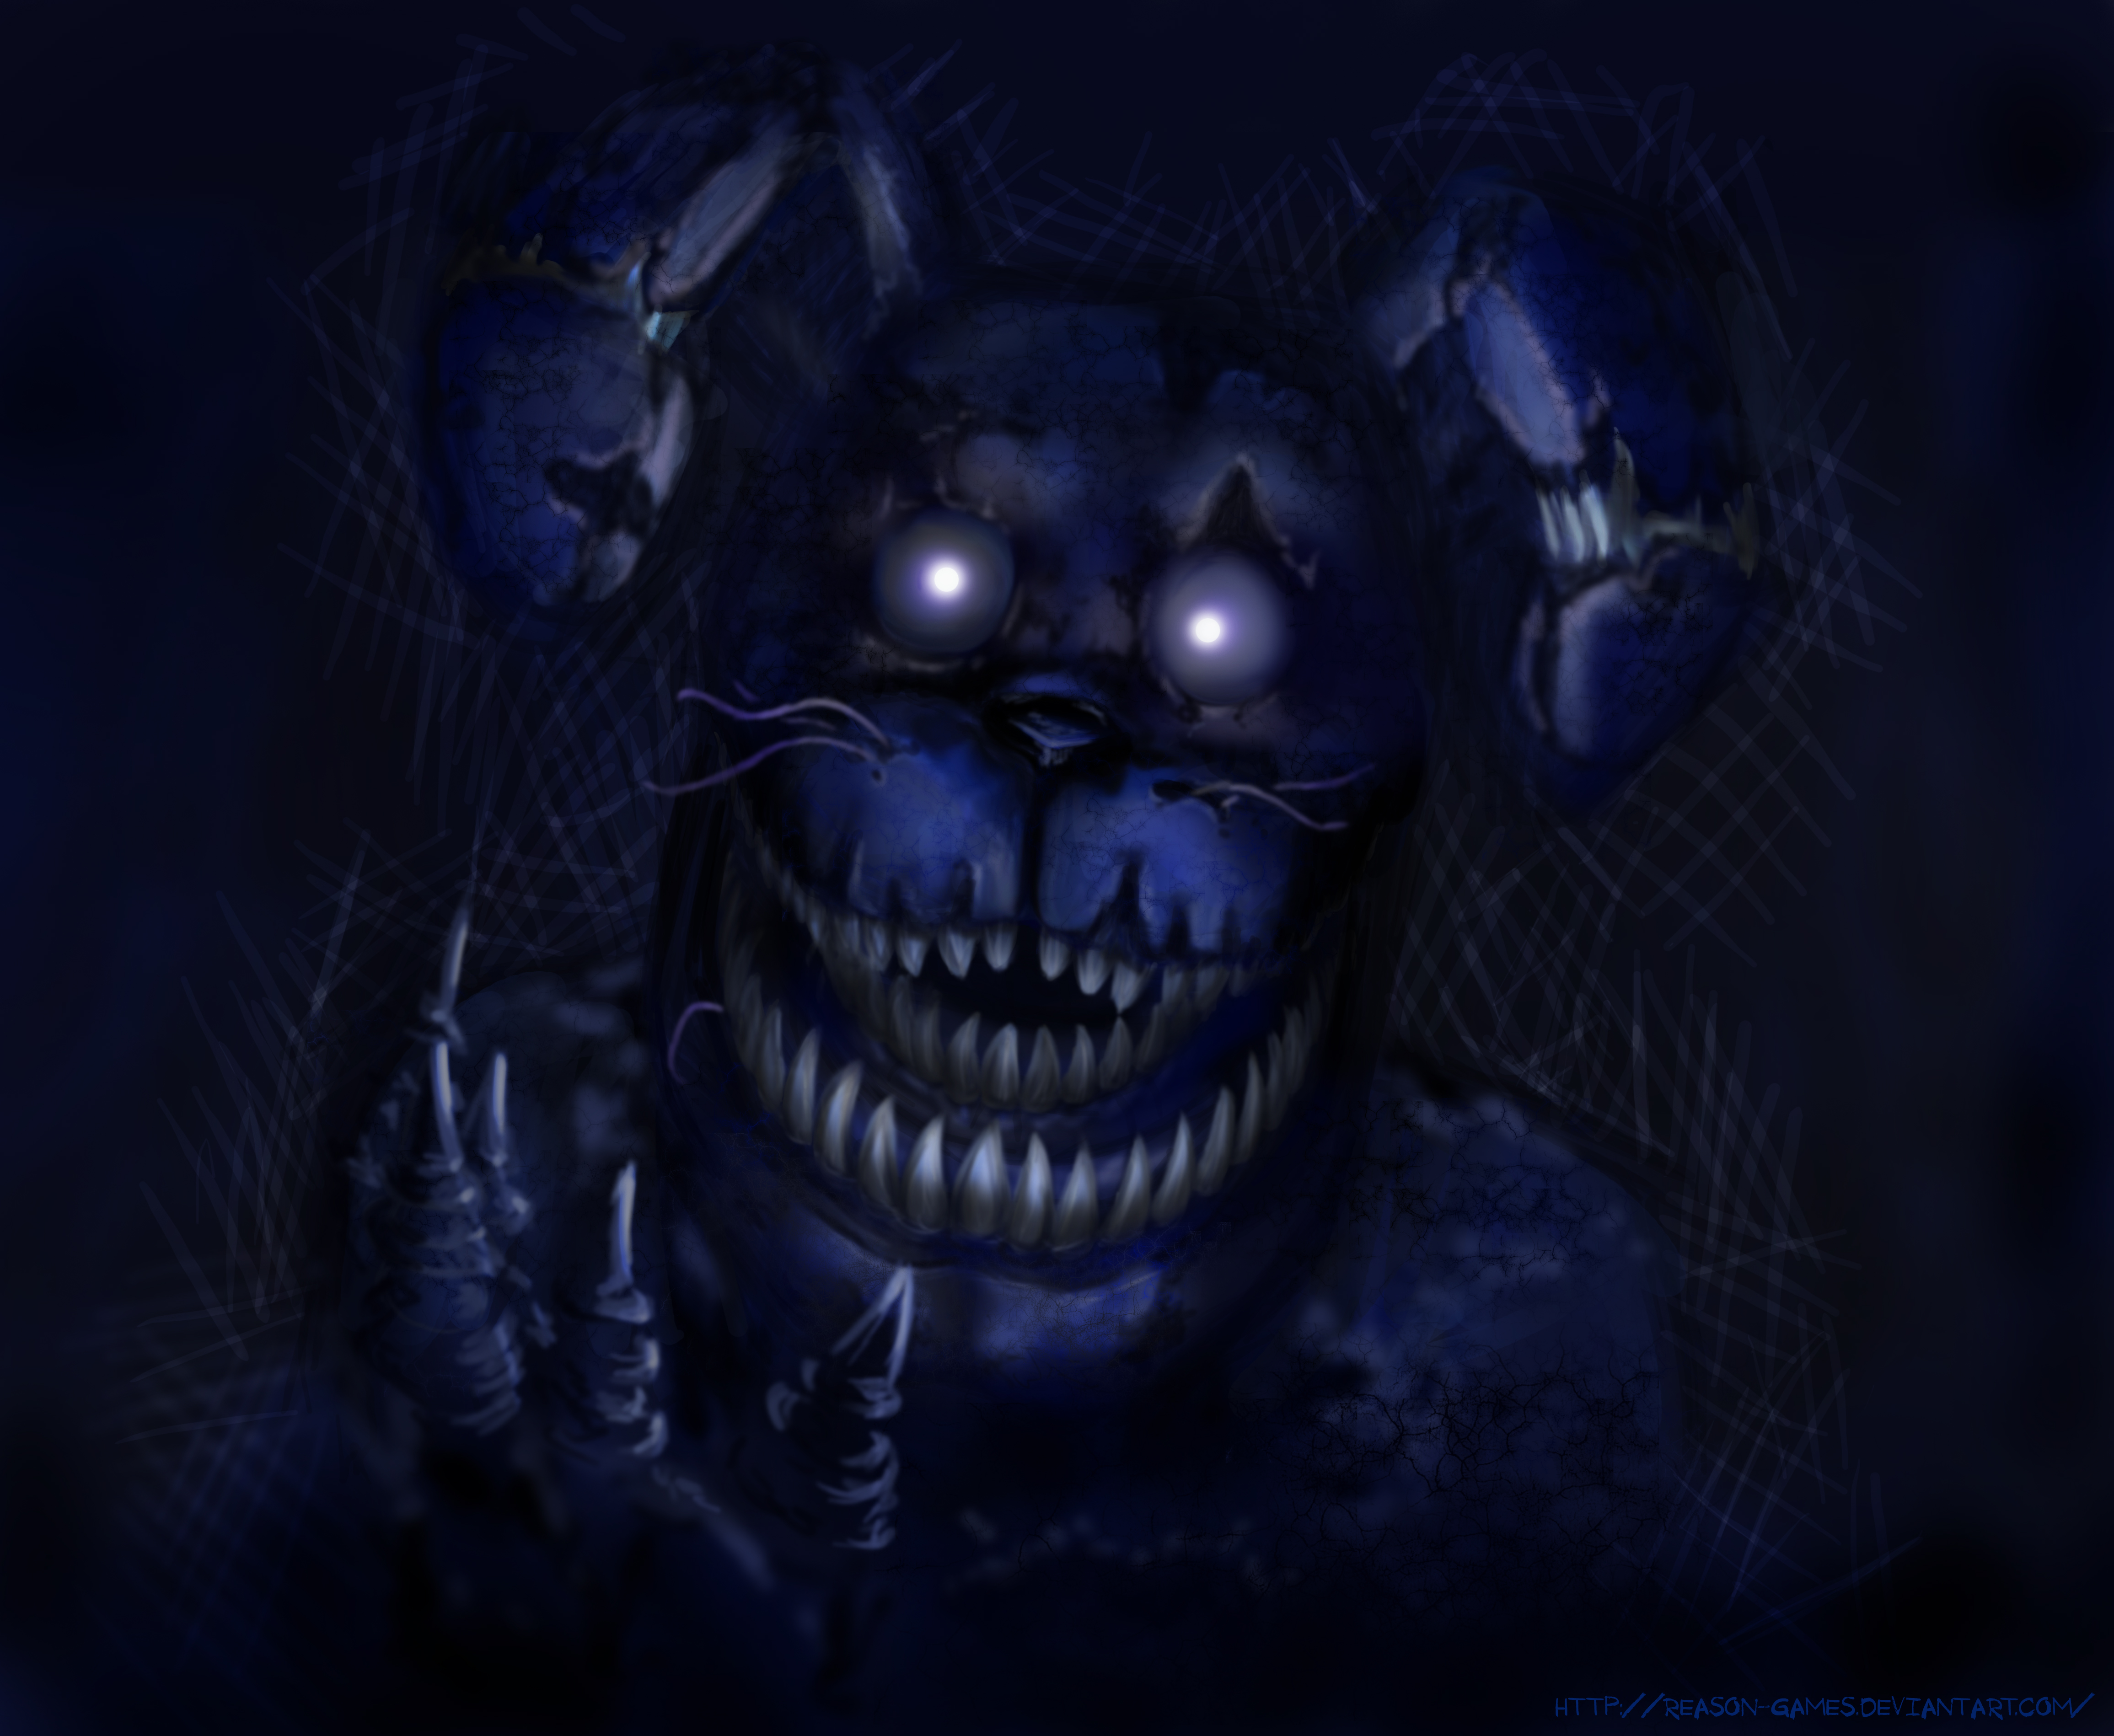 Bonnie Five Nights at Freddys 4 by Reason Games on